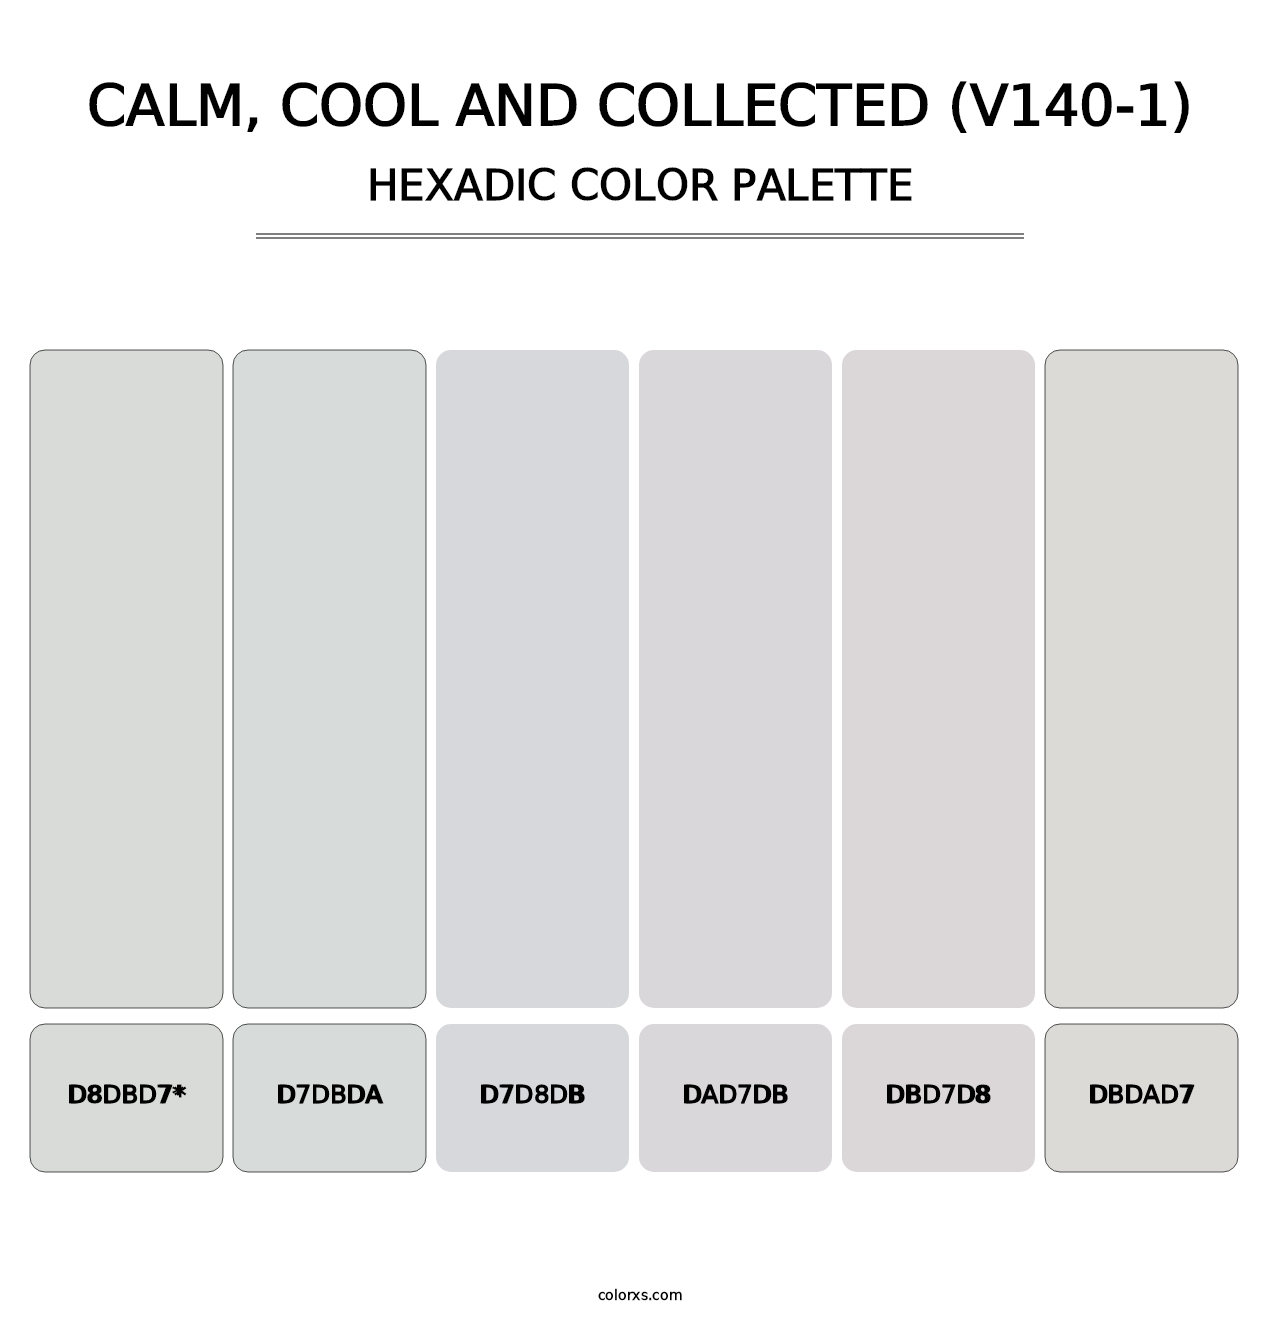 Calm, Cool and Collected (V140-1) - Hexadic Color Palette